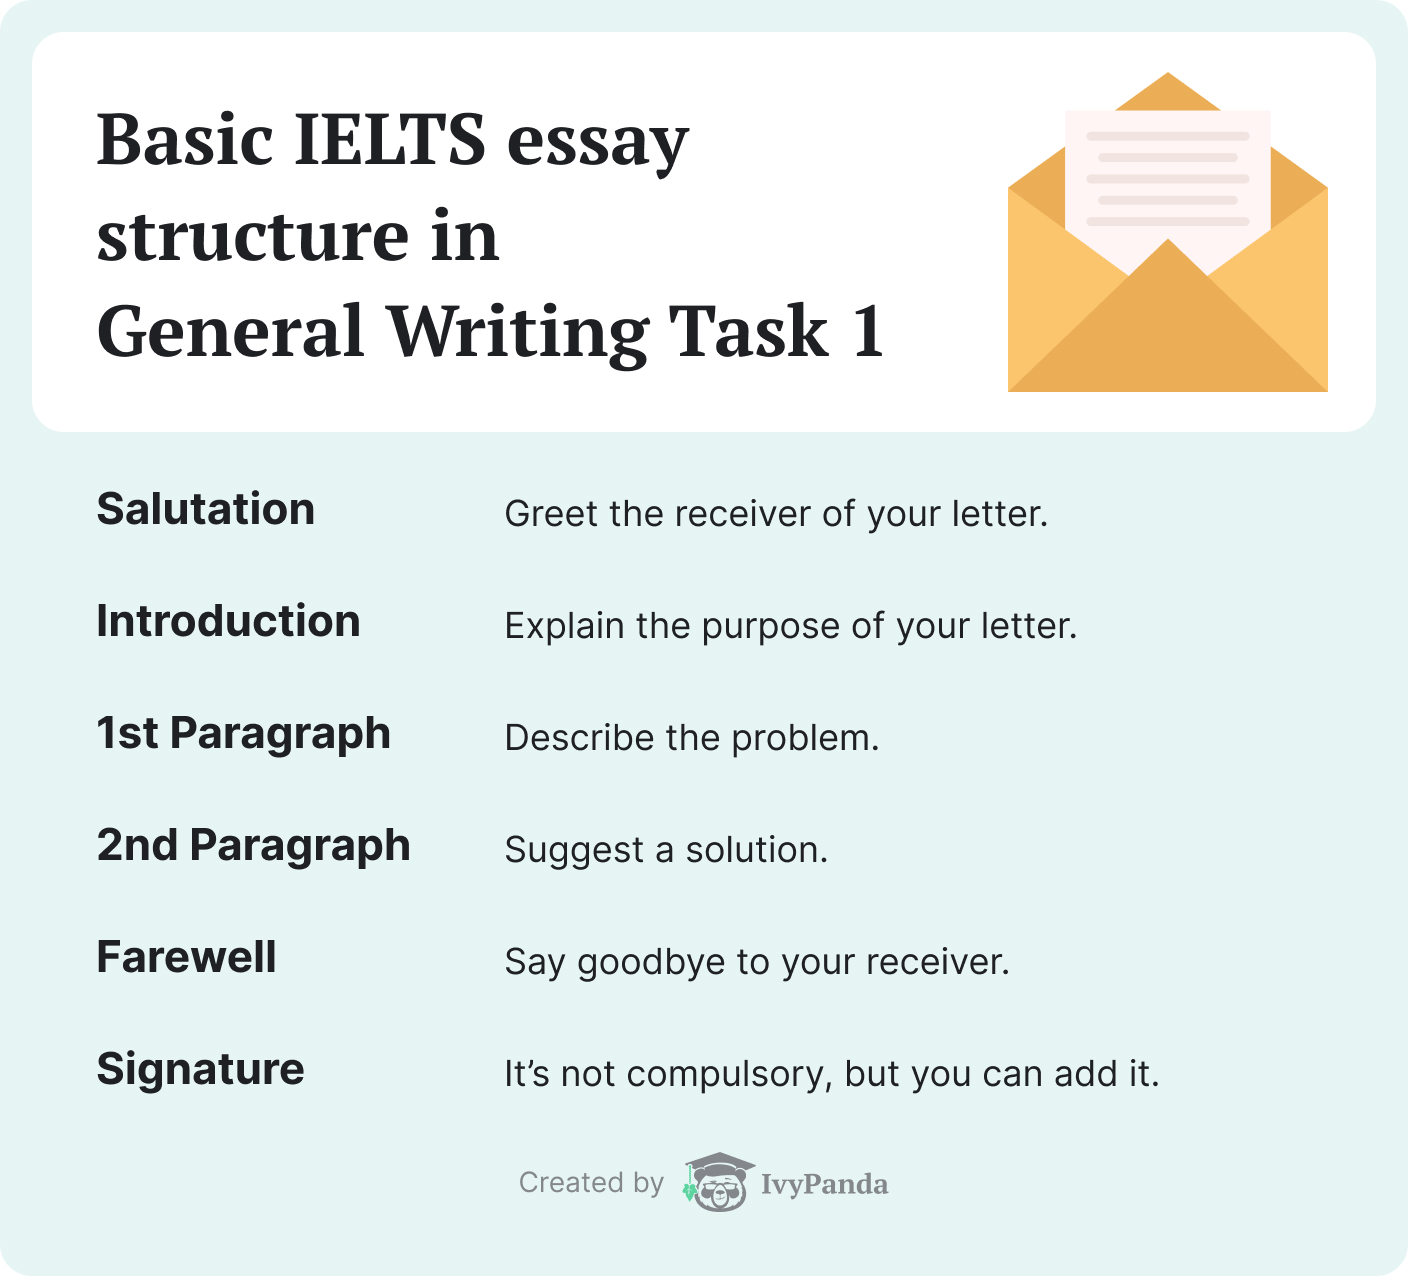 IELTS essay structure for General Writing Task 1.